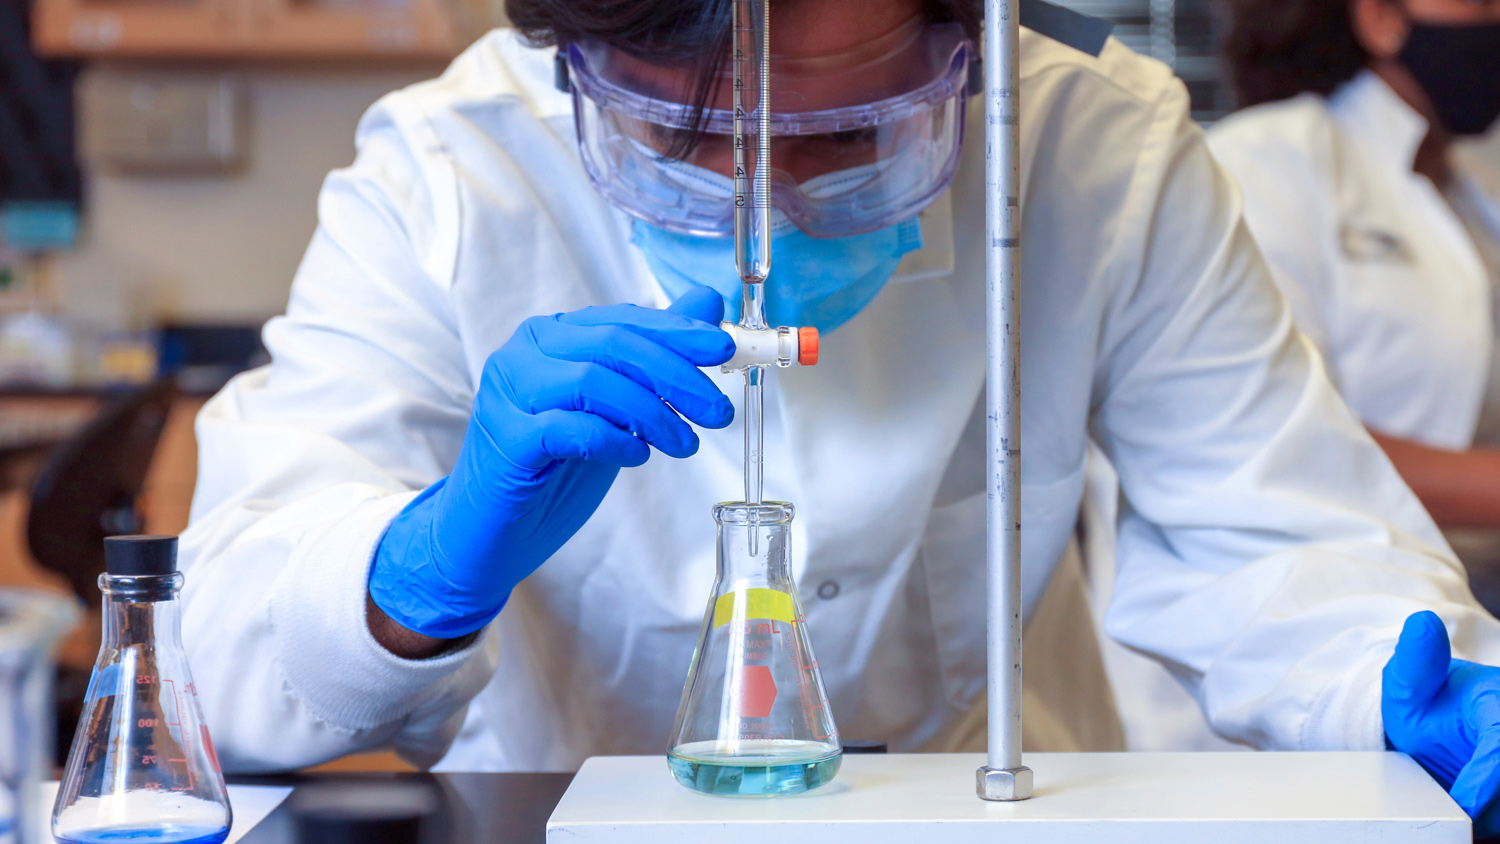 A student conducting a chemistry experiment